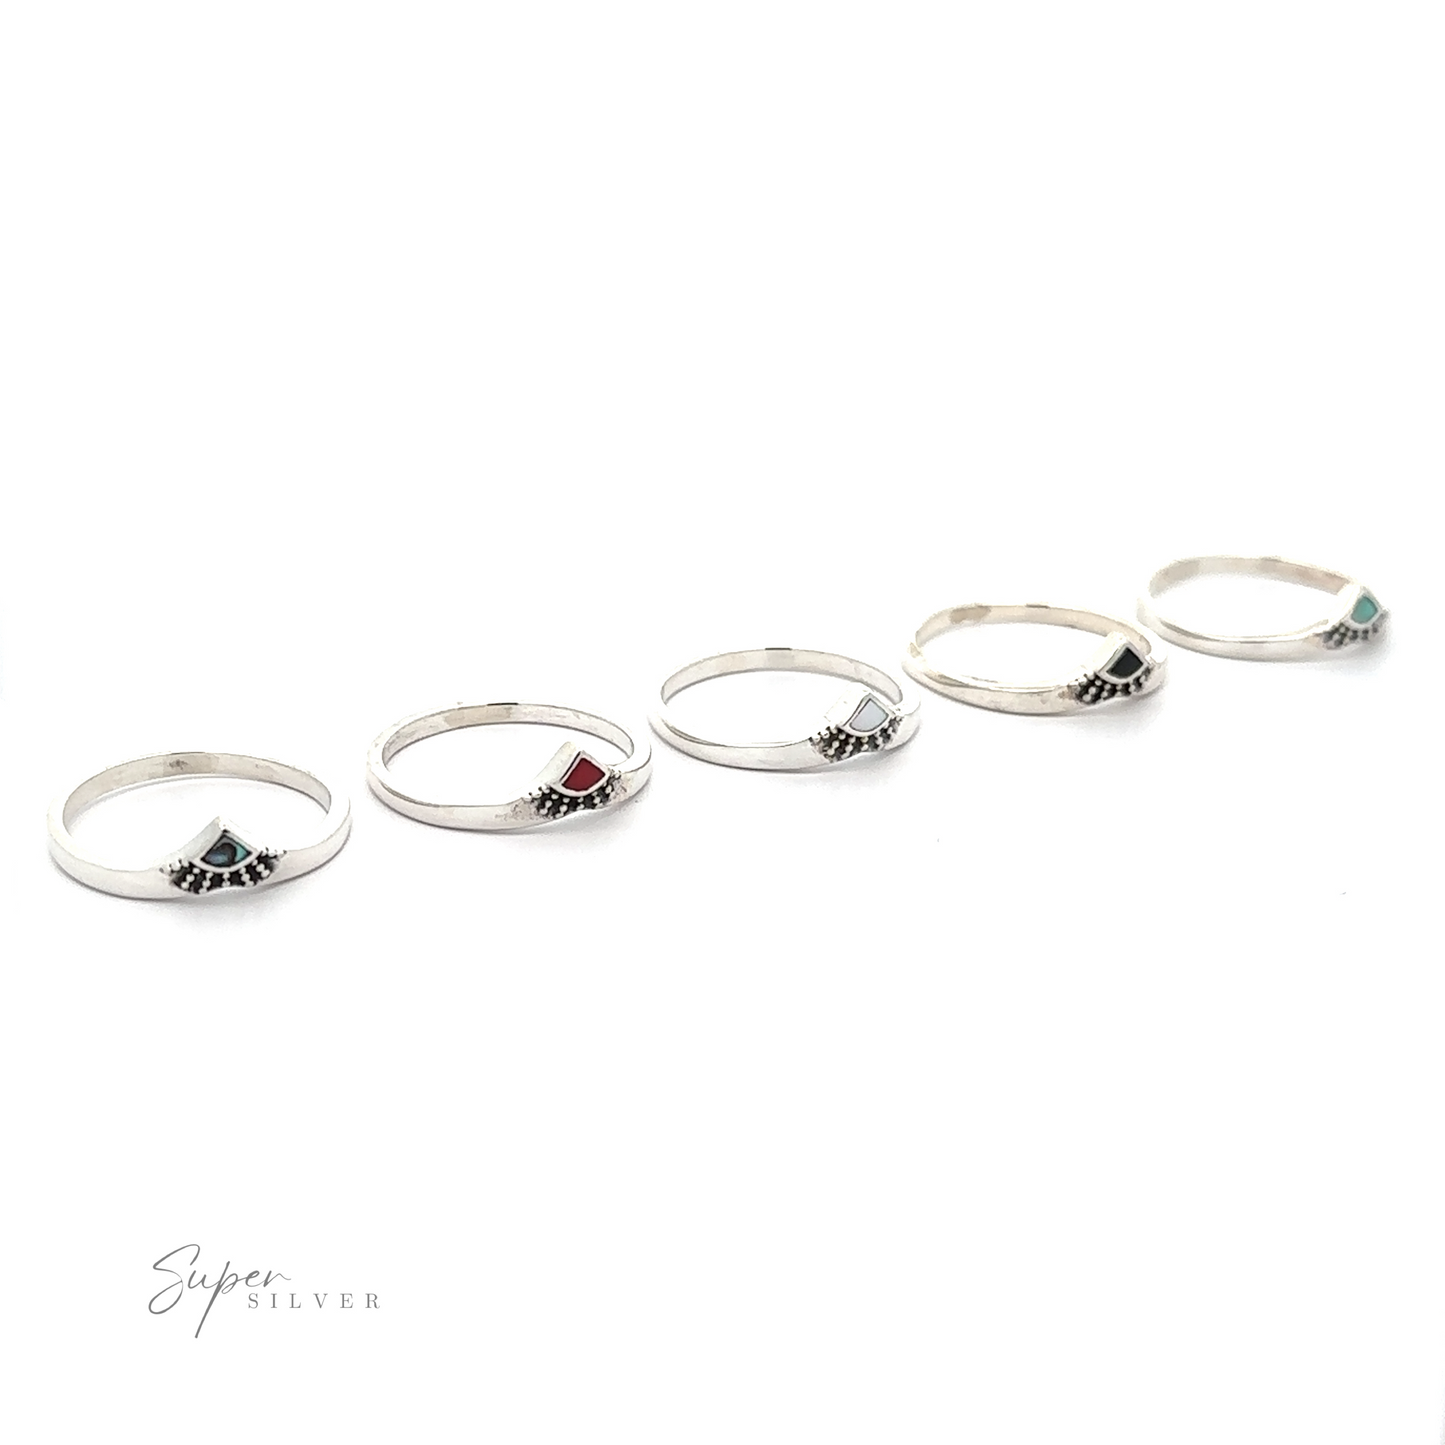 A row of Dainty Chevron Bali Style Inlay Rings with different colored stones, a versatile accessory for free-spirited charm.